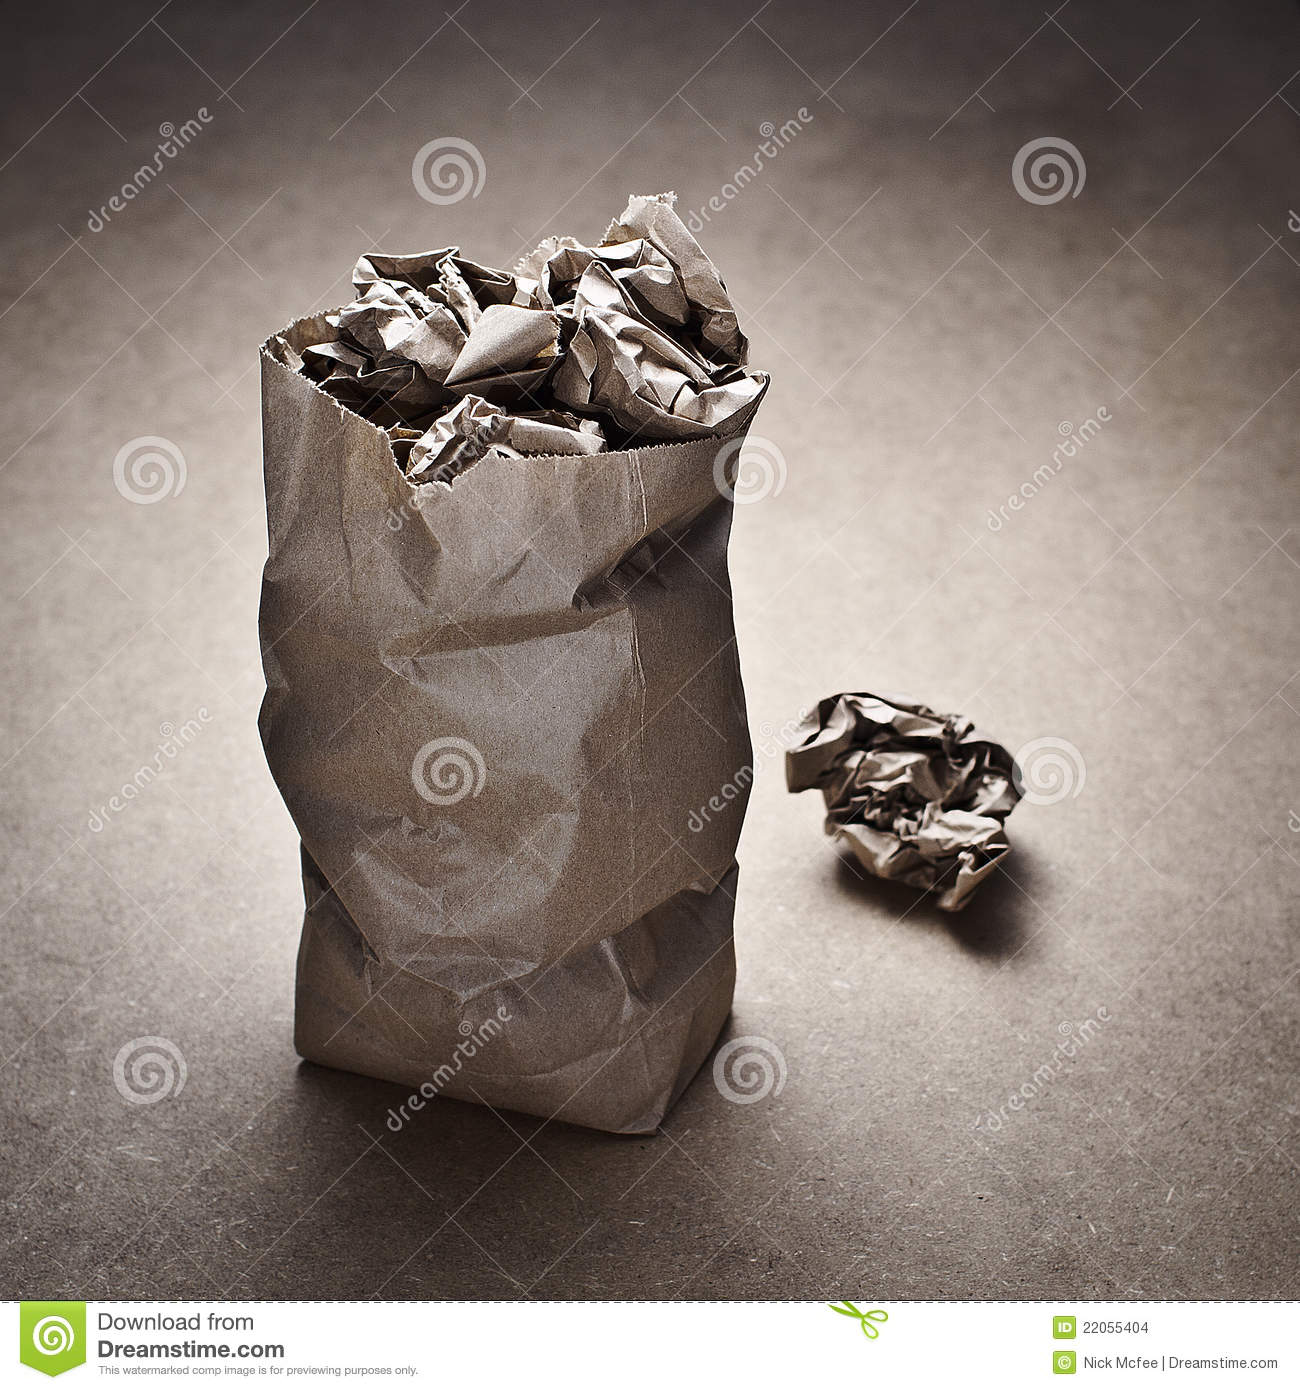 Brown Paper Bag Containing Wadded Up Paper Bags Sitting On Brown